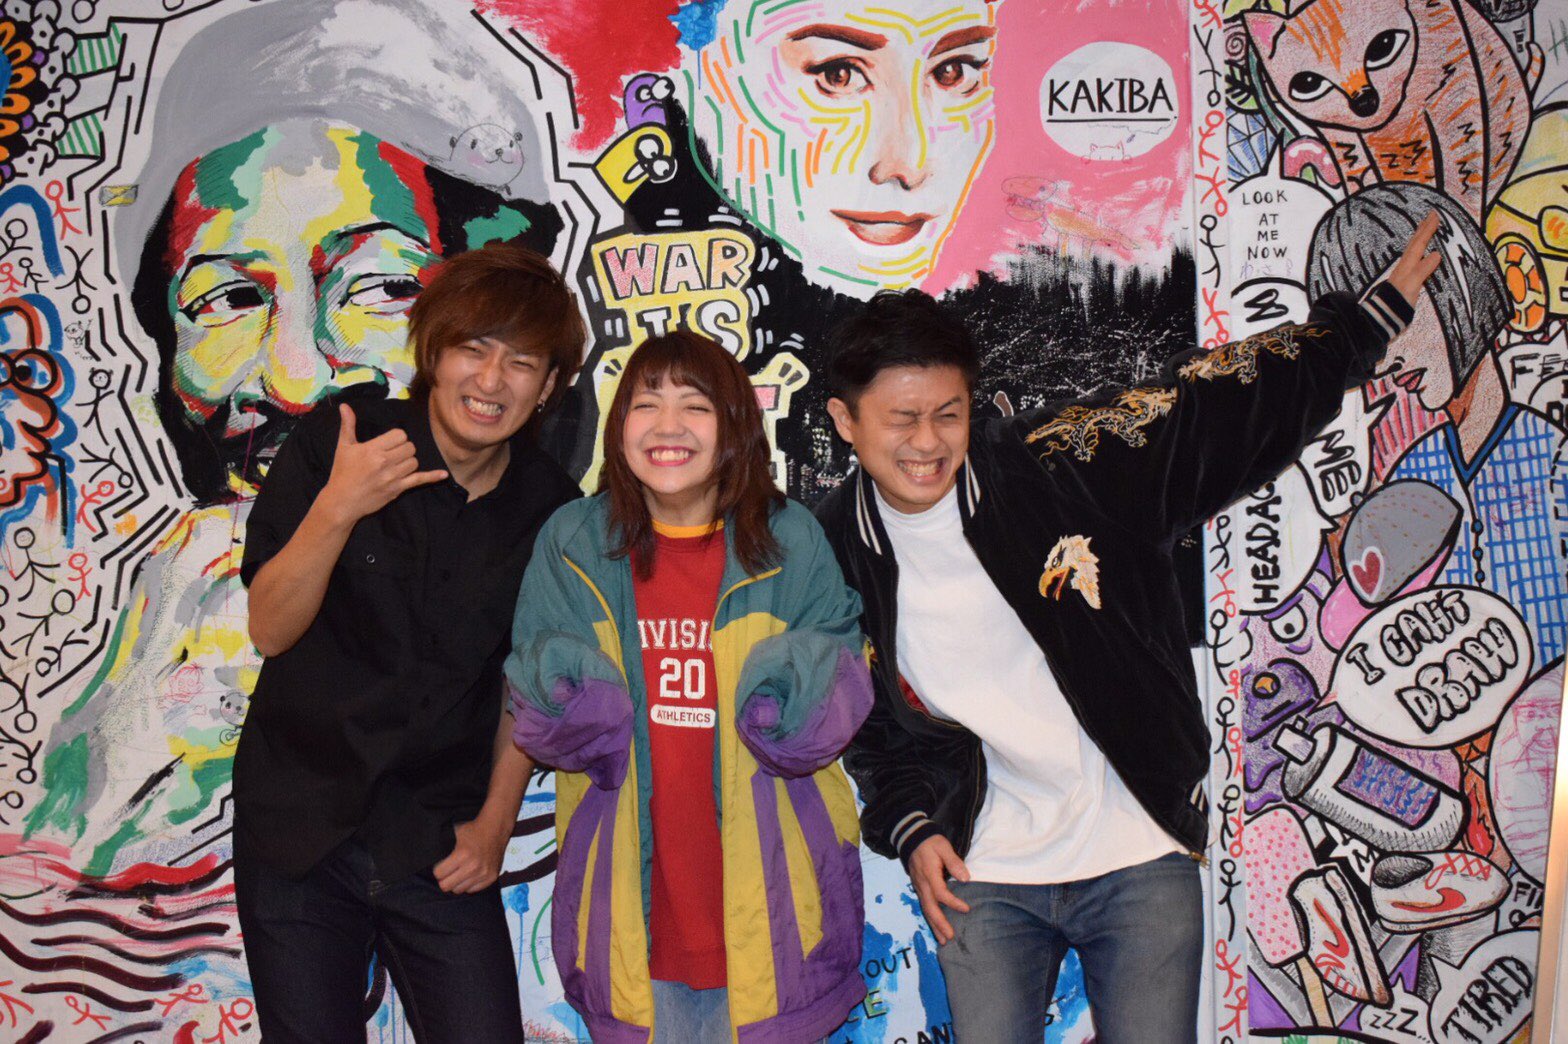 jo-bu pre. Carry On -WEEKEND MEETING 1st EP 「メリア」Release Tour-